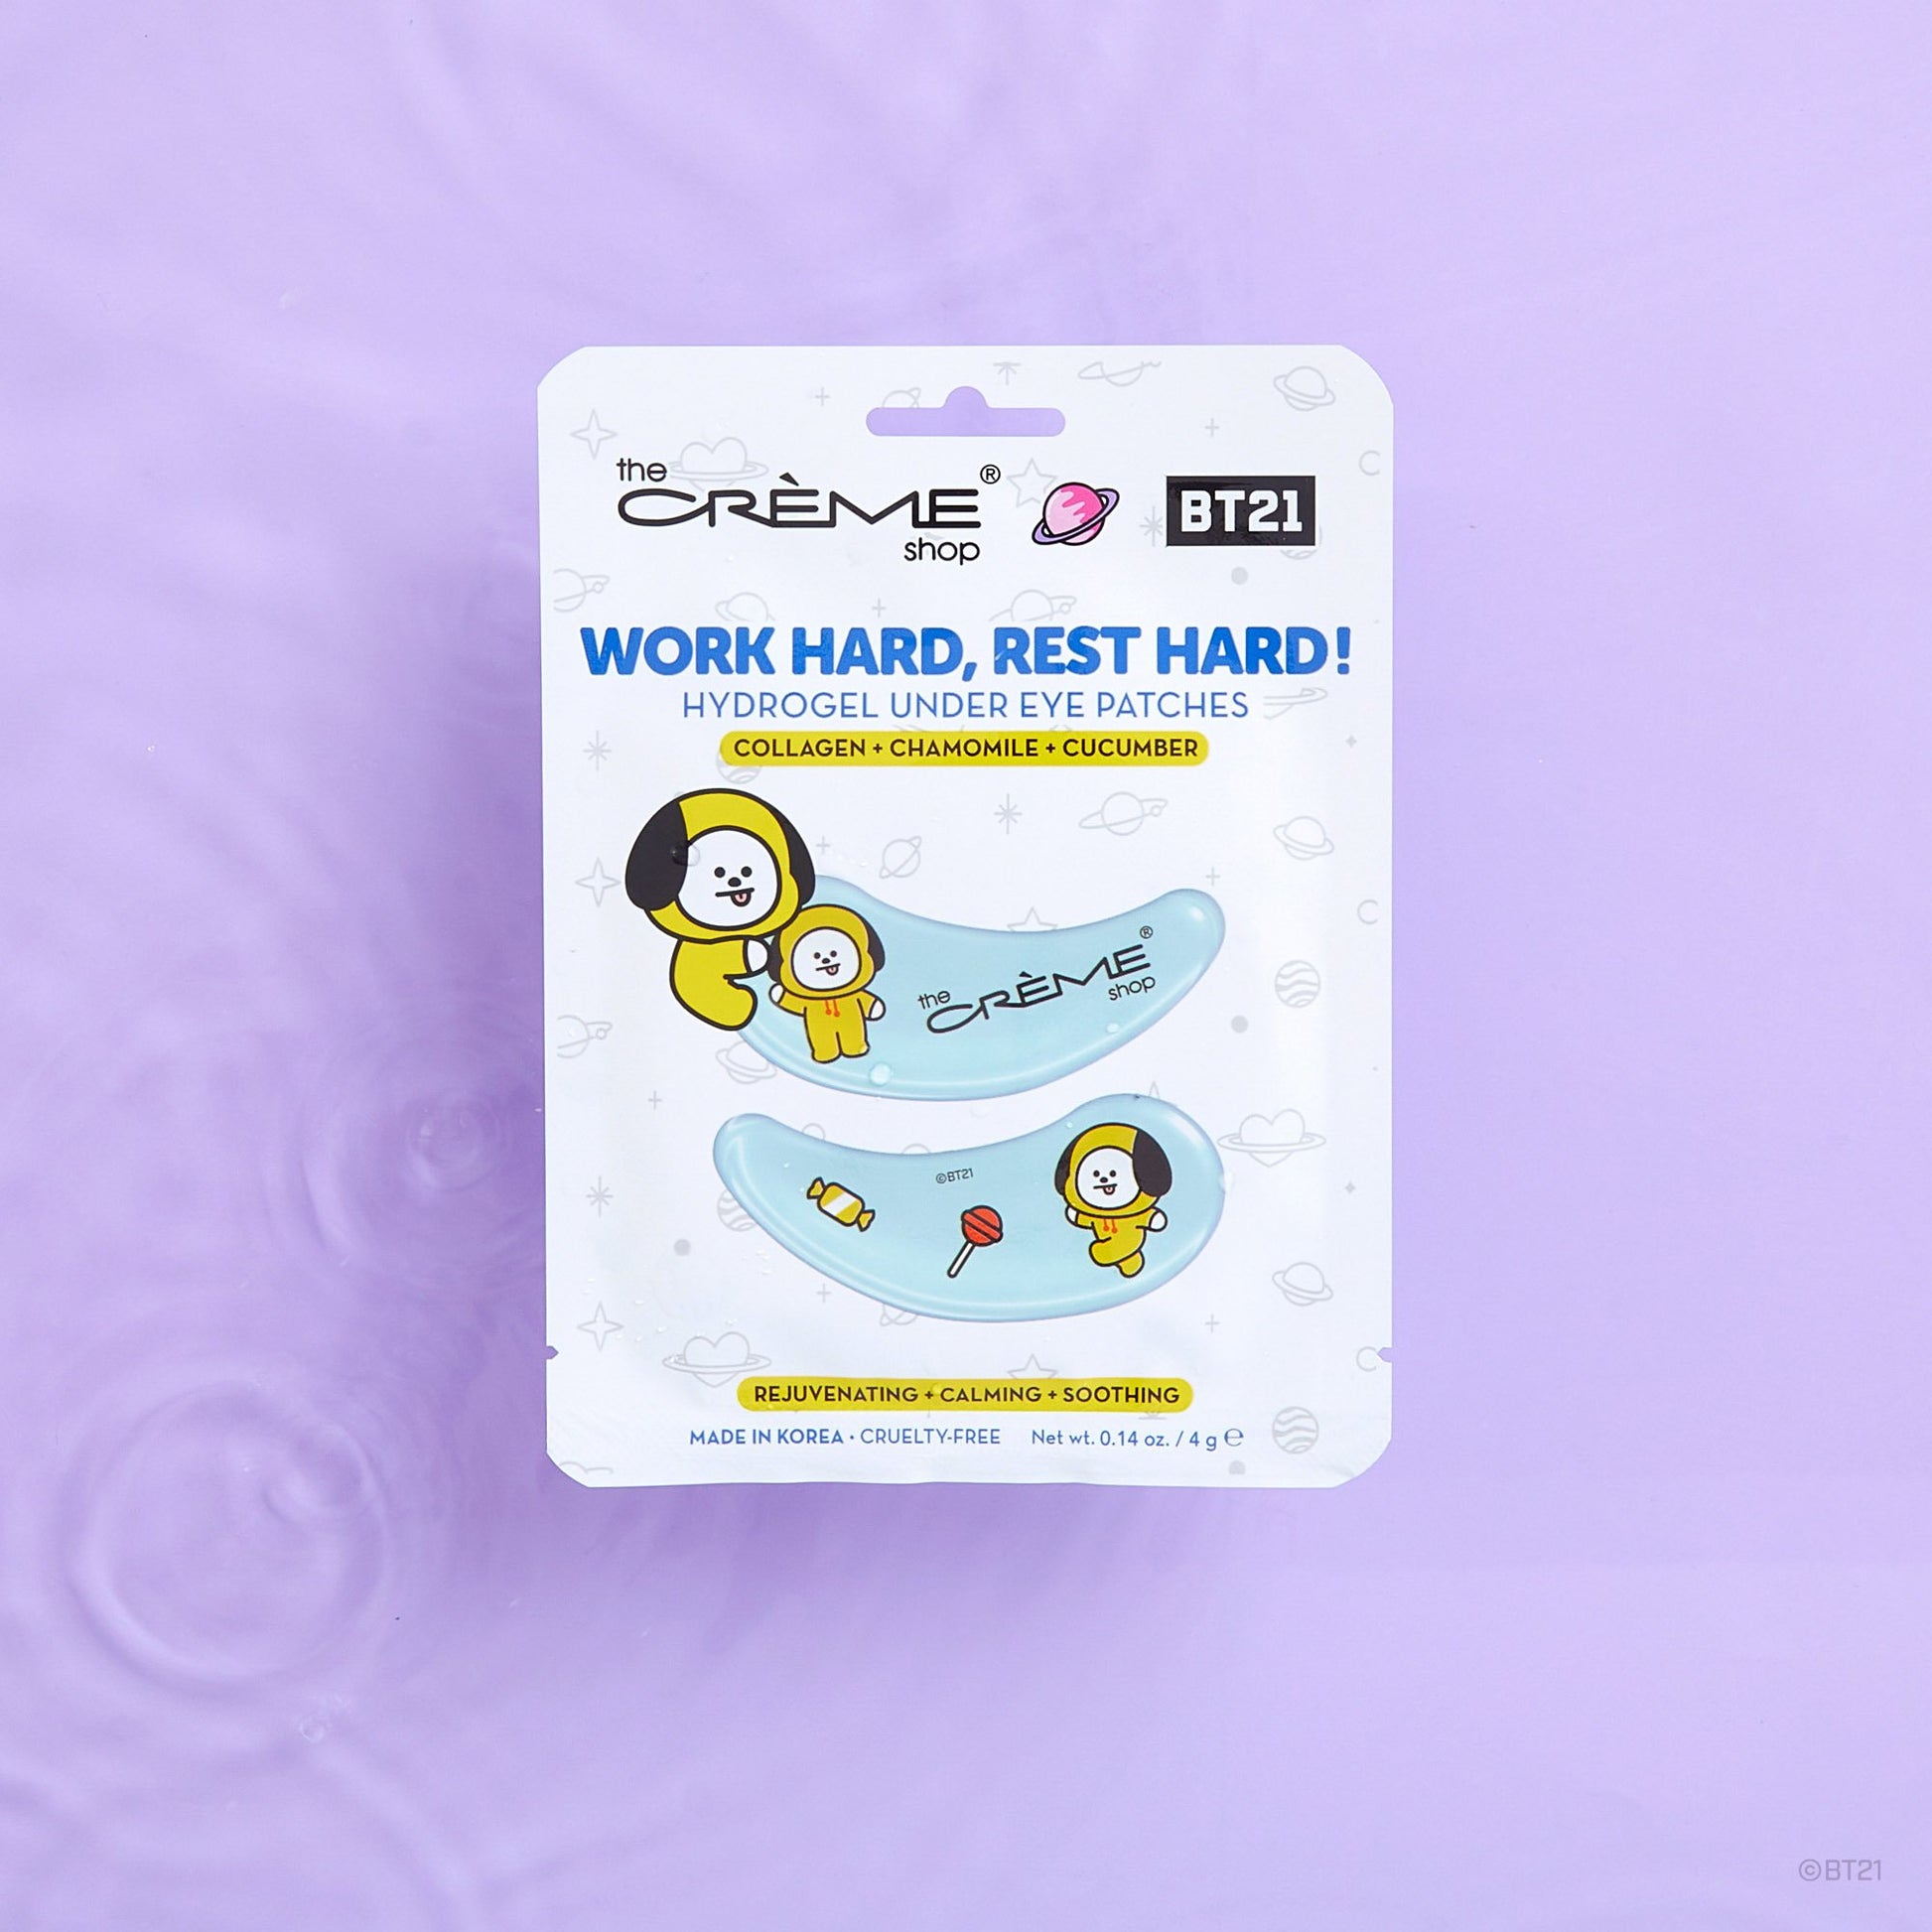 “Work Hard, Rest Hard!” CHIMMY Hydrogel Under Eye Patches | Rejuvenating, Calming, & Soothing Under Eye Patches The Crème Shop x BT21 